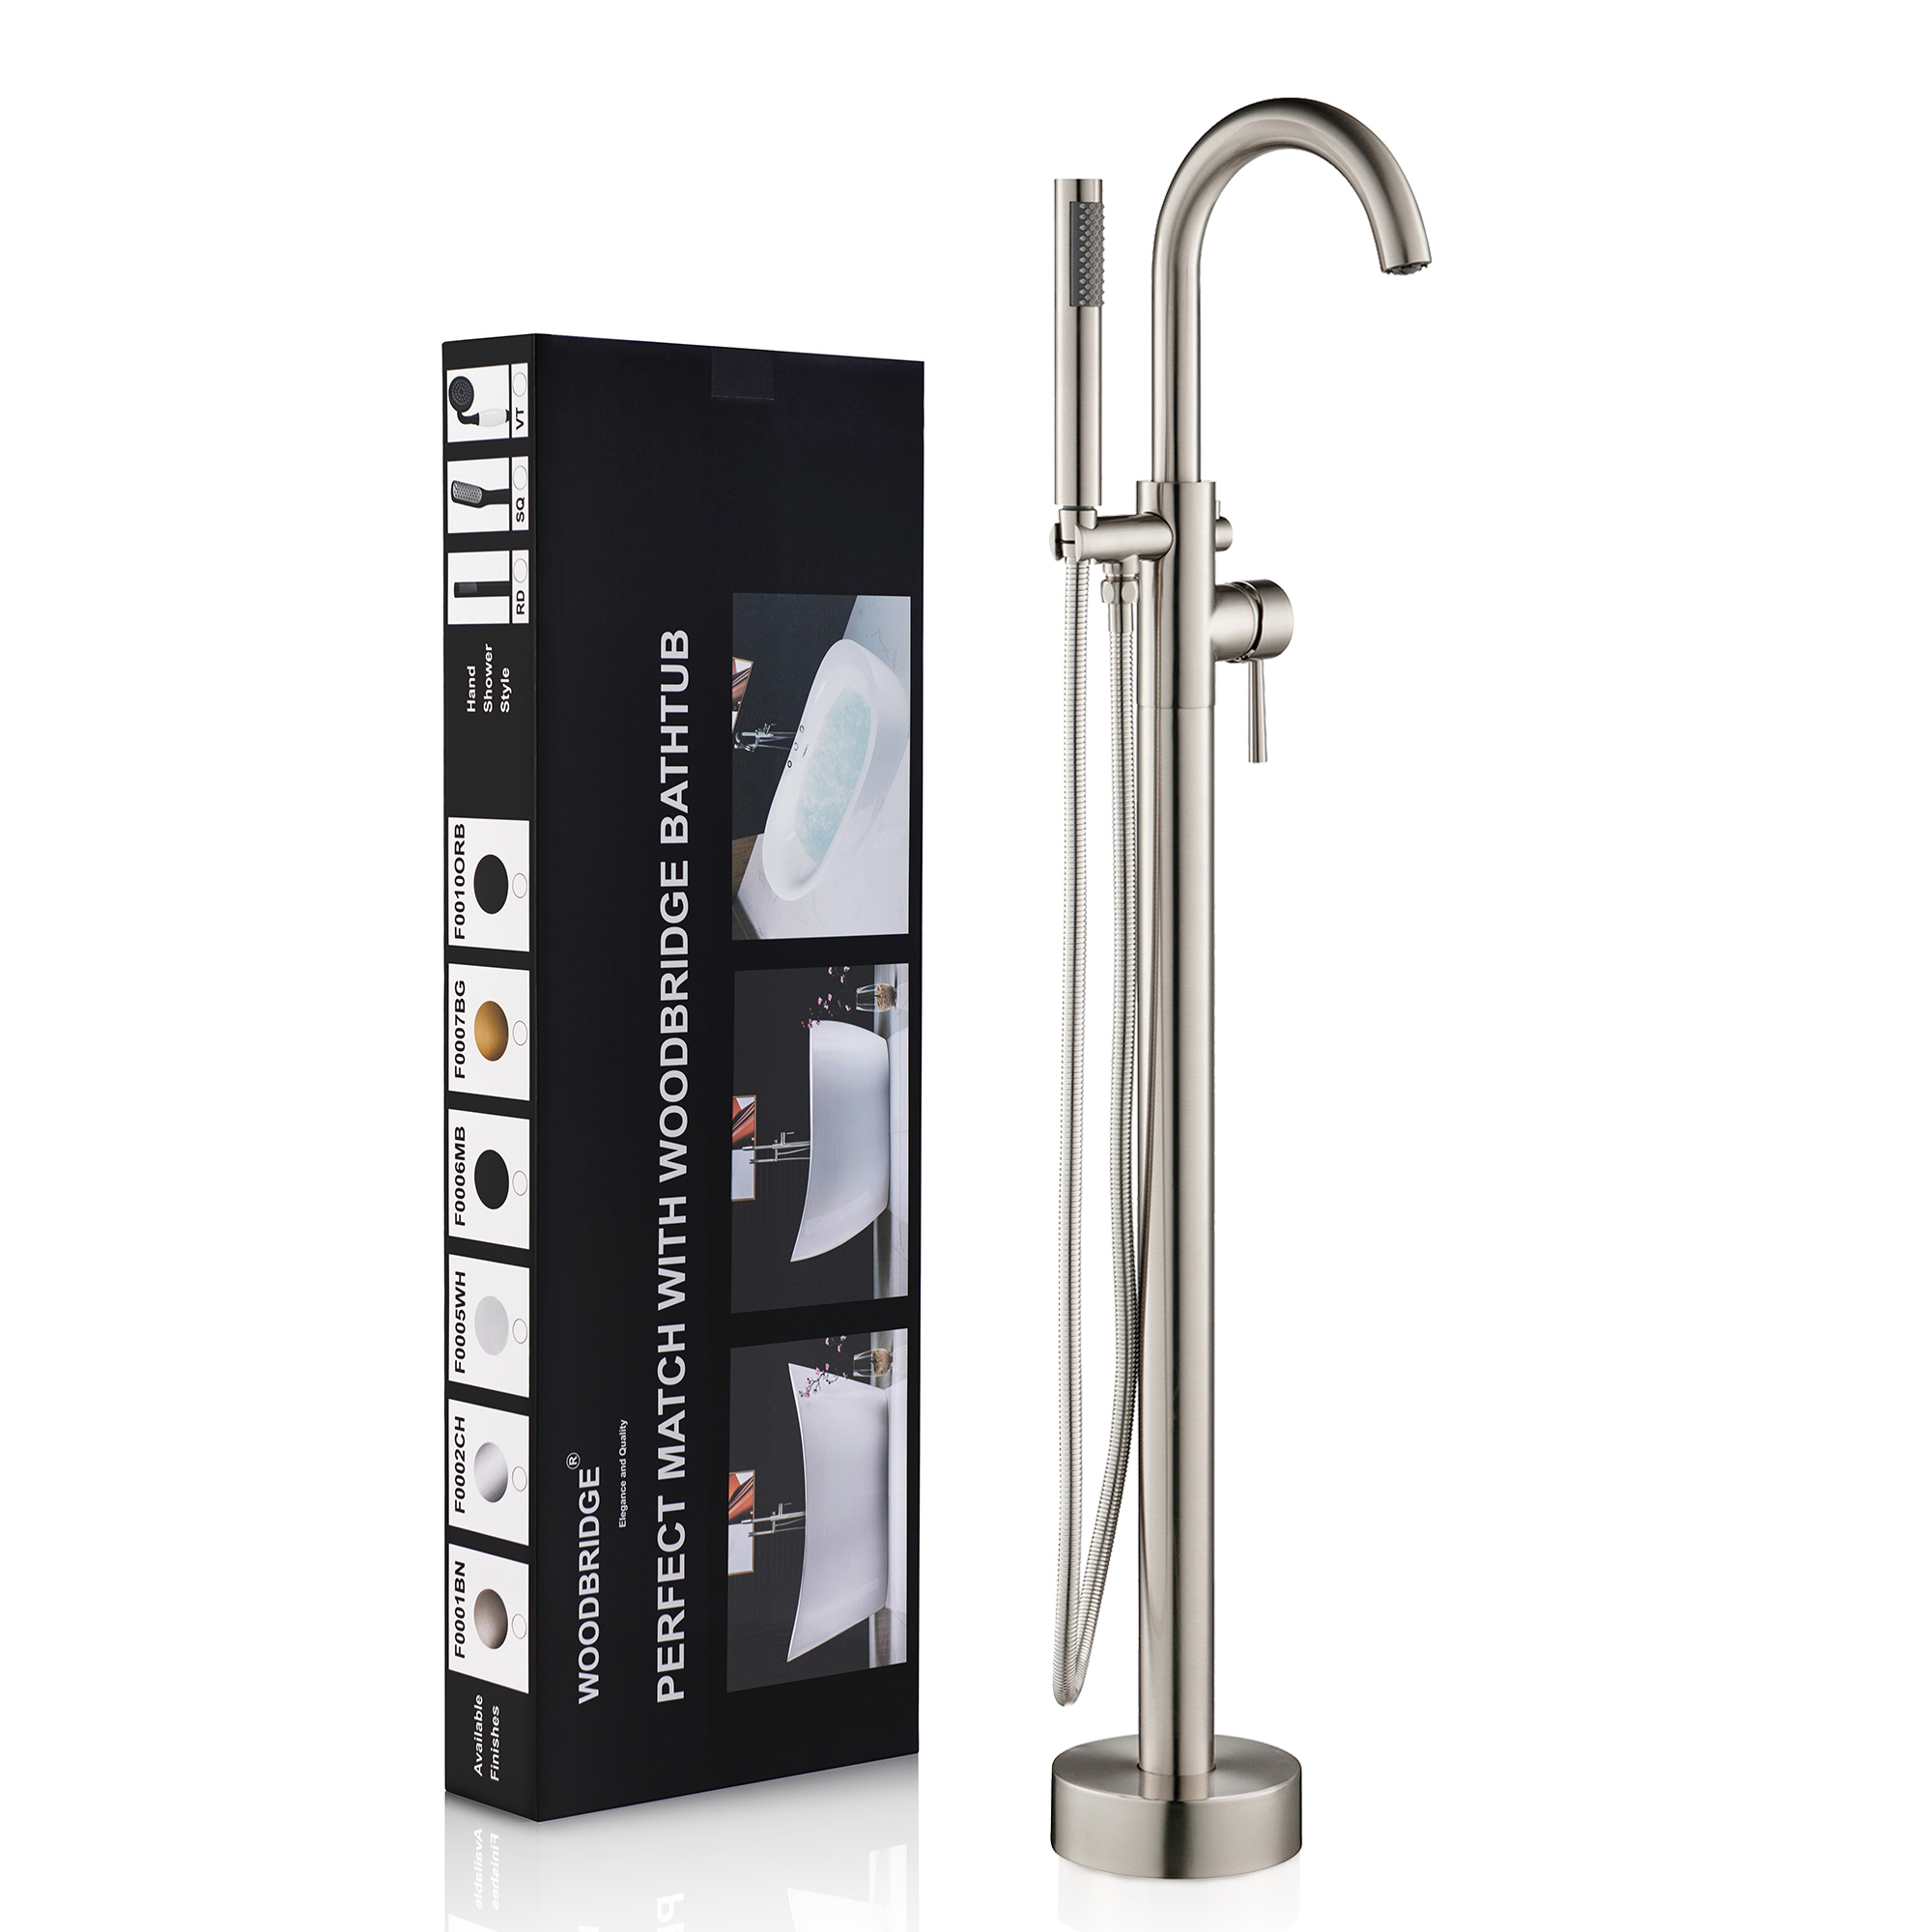  WOODBRIDGE F0001BNRD Contemporary Single Handle Floor Mount Freestanding Tub Filler Faucet with Hand shower in Brushed Nickel Finish._11453